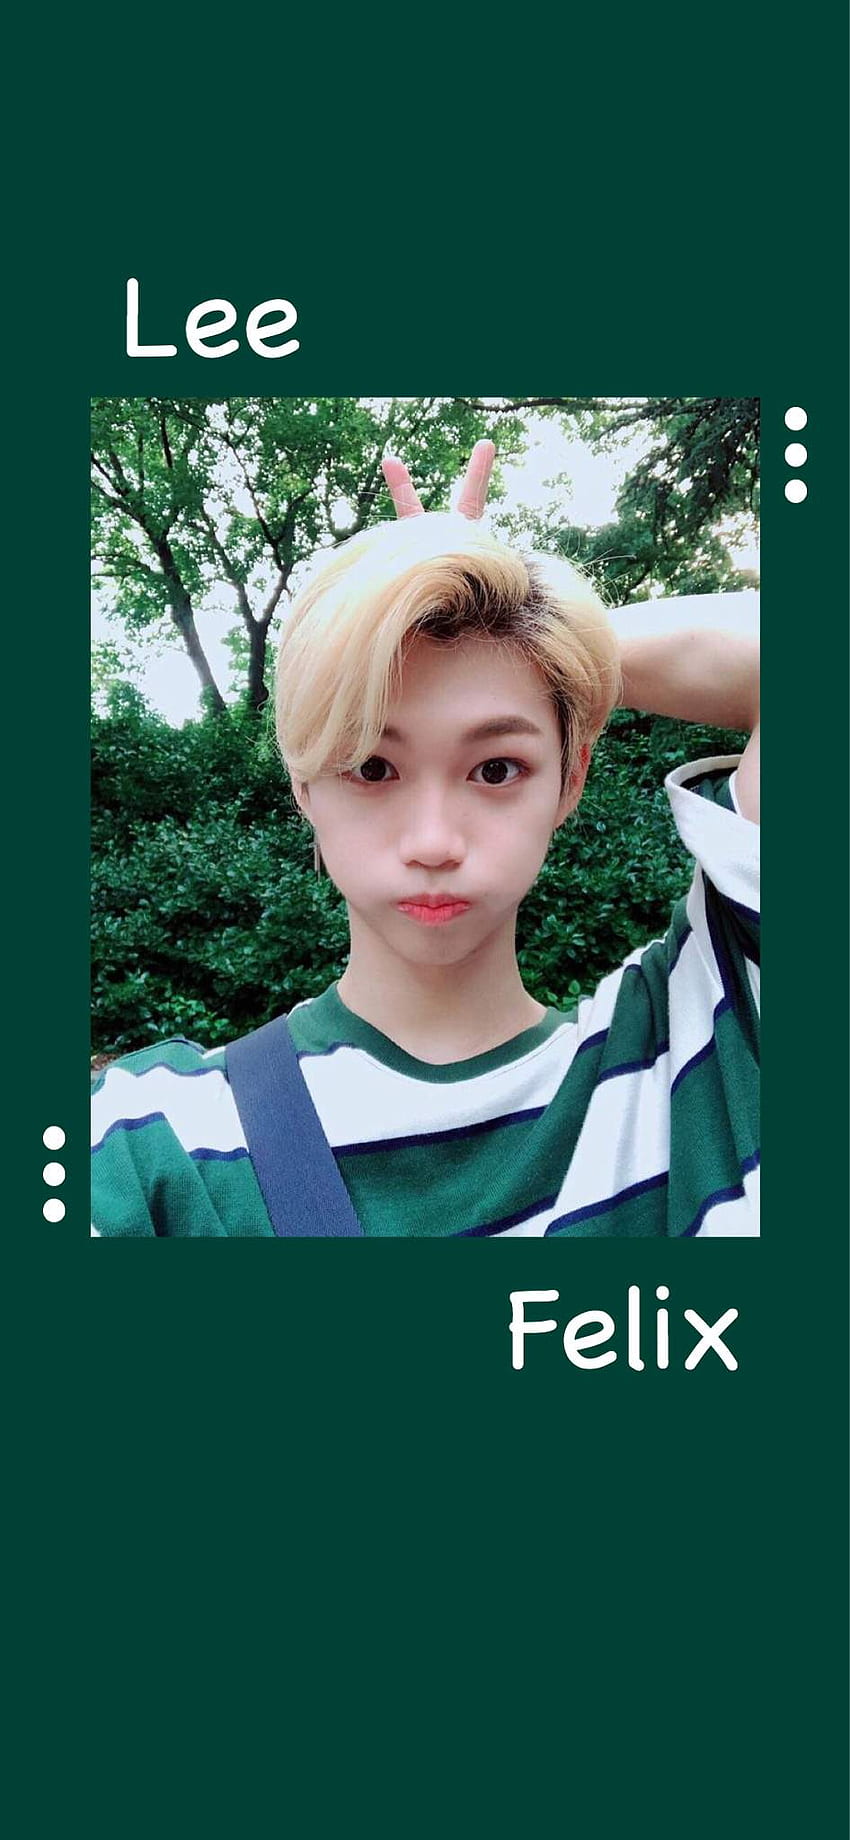 Hi! I just joined and I decided to make 2 lol. The one, Lee Felix HD phone wallpaper